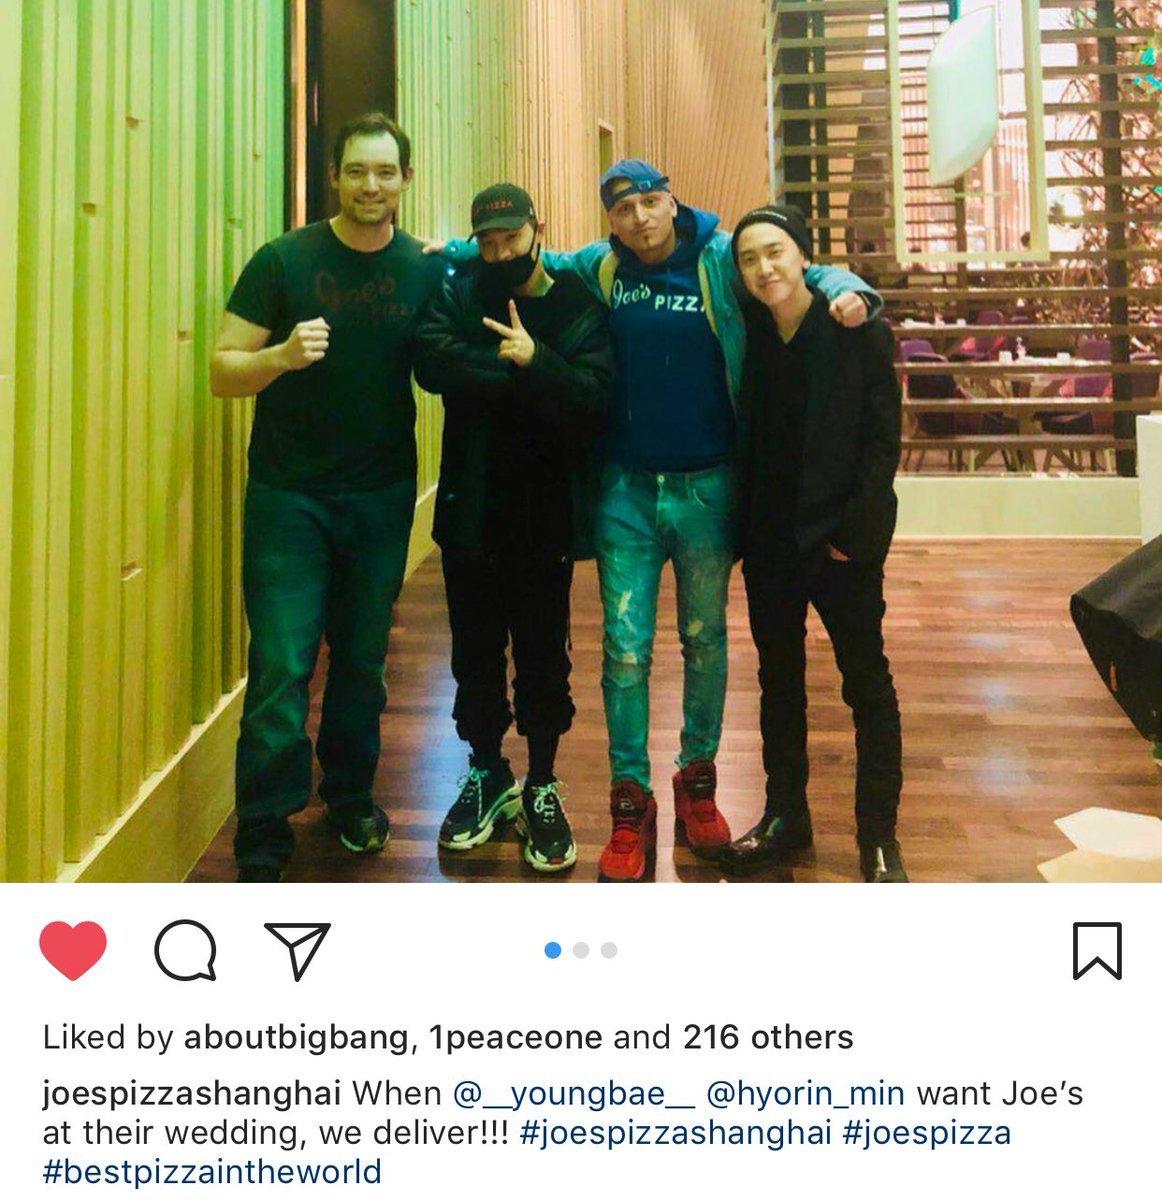 joespizzashanghai IG update“When __youngbae__ hyorin_min want Joe’s at their wedding, we deliver!!!  #joespizzashanghai  #joespizza  #bestpizzaintheworld” OMG HAHAH YB..... 